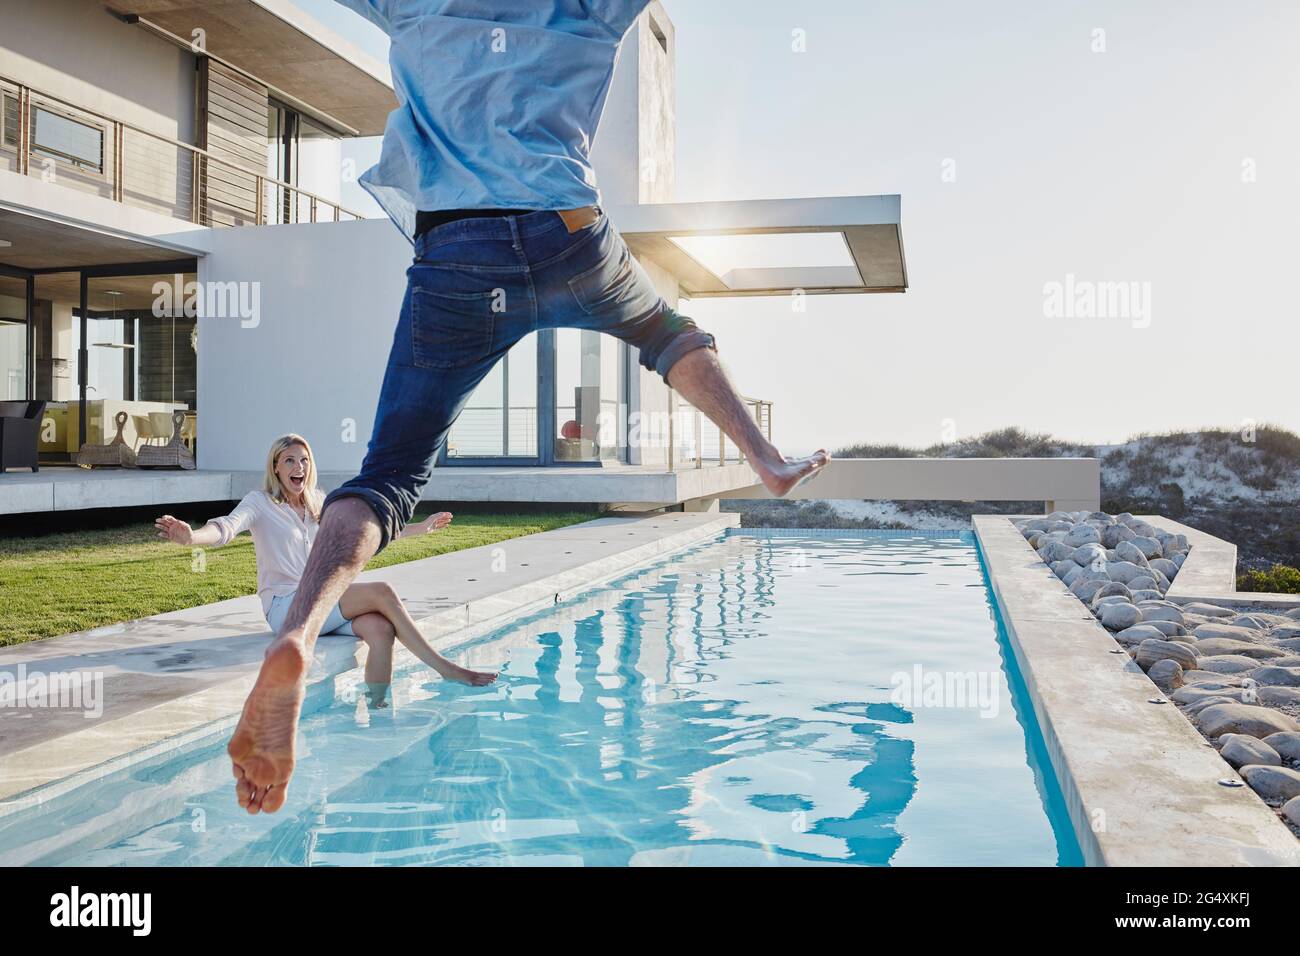 Happy woman looking at man jumping in swimming pool Stock Photo